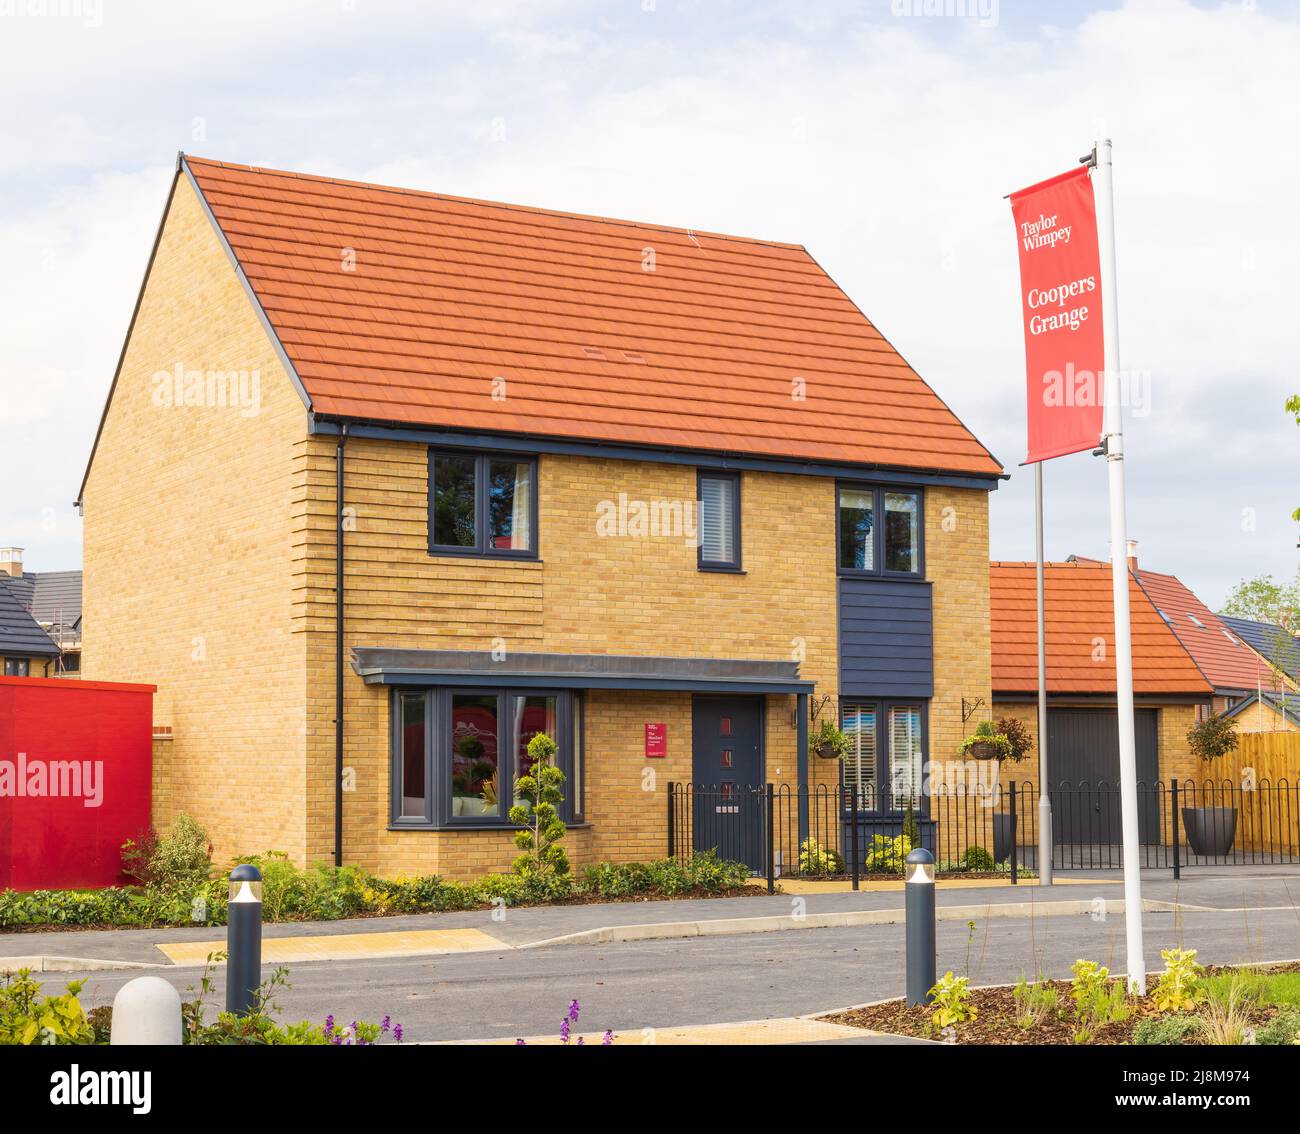 Taylor Wimpey Manford showhome at the Coopers Grange housing development. Stock Photo